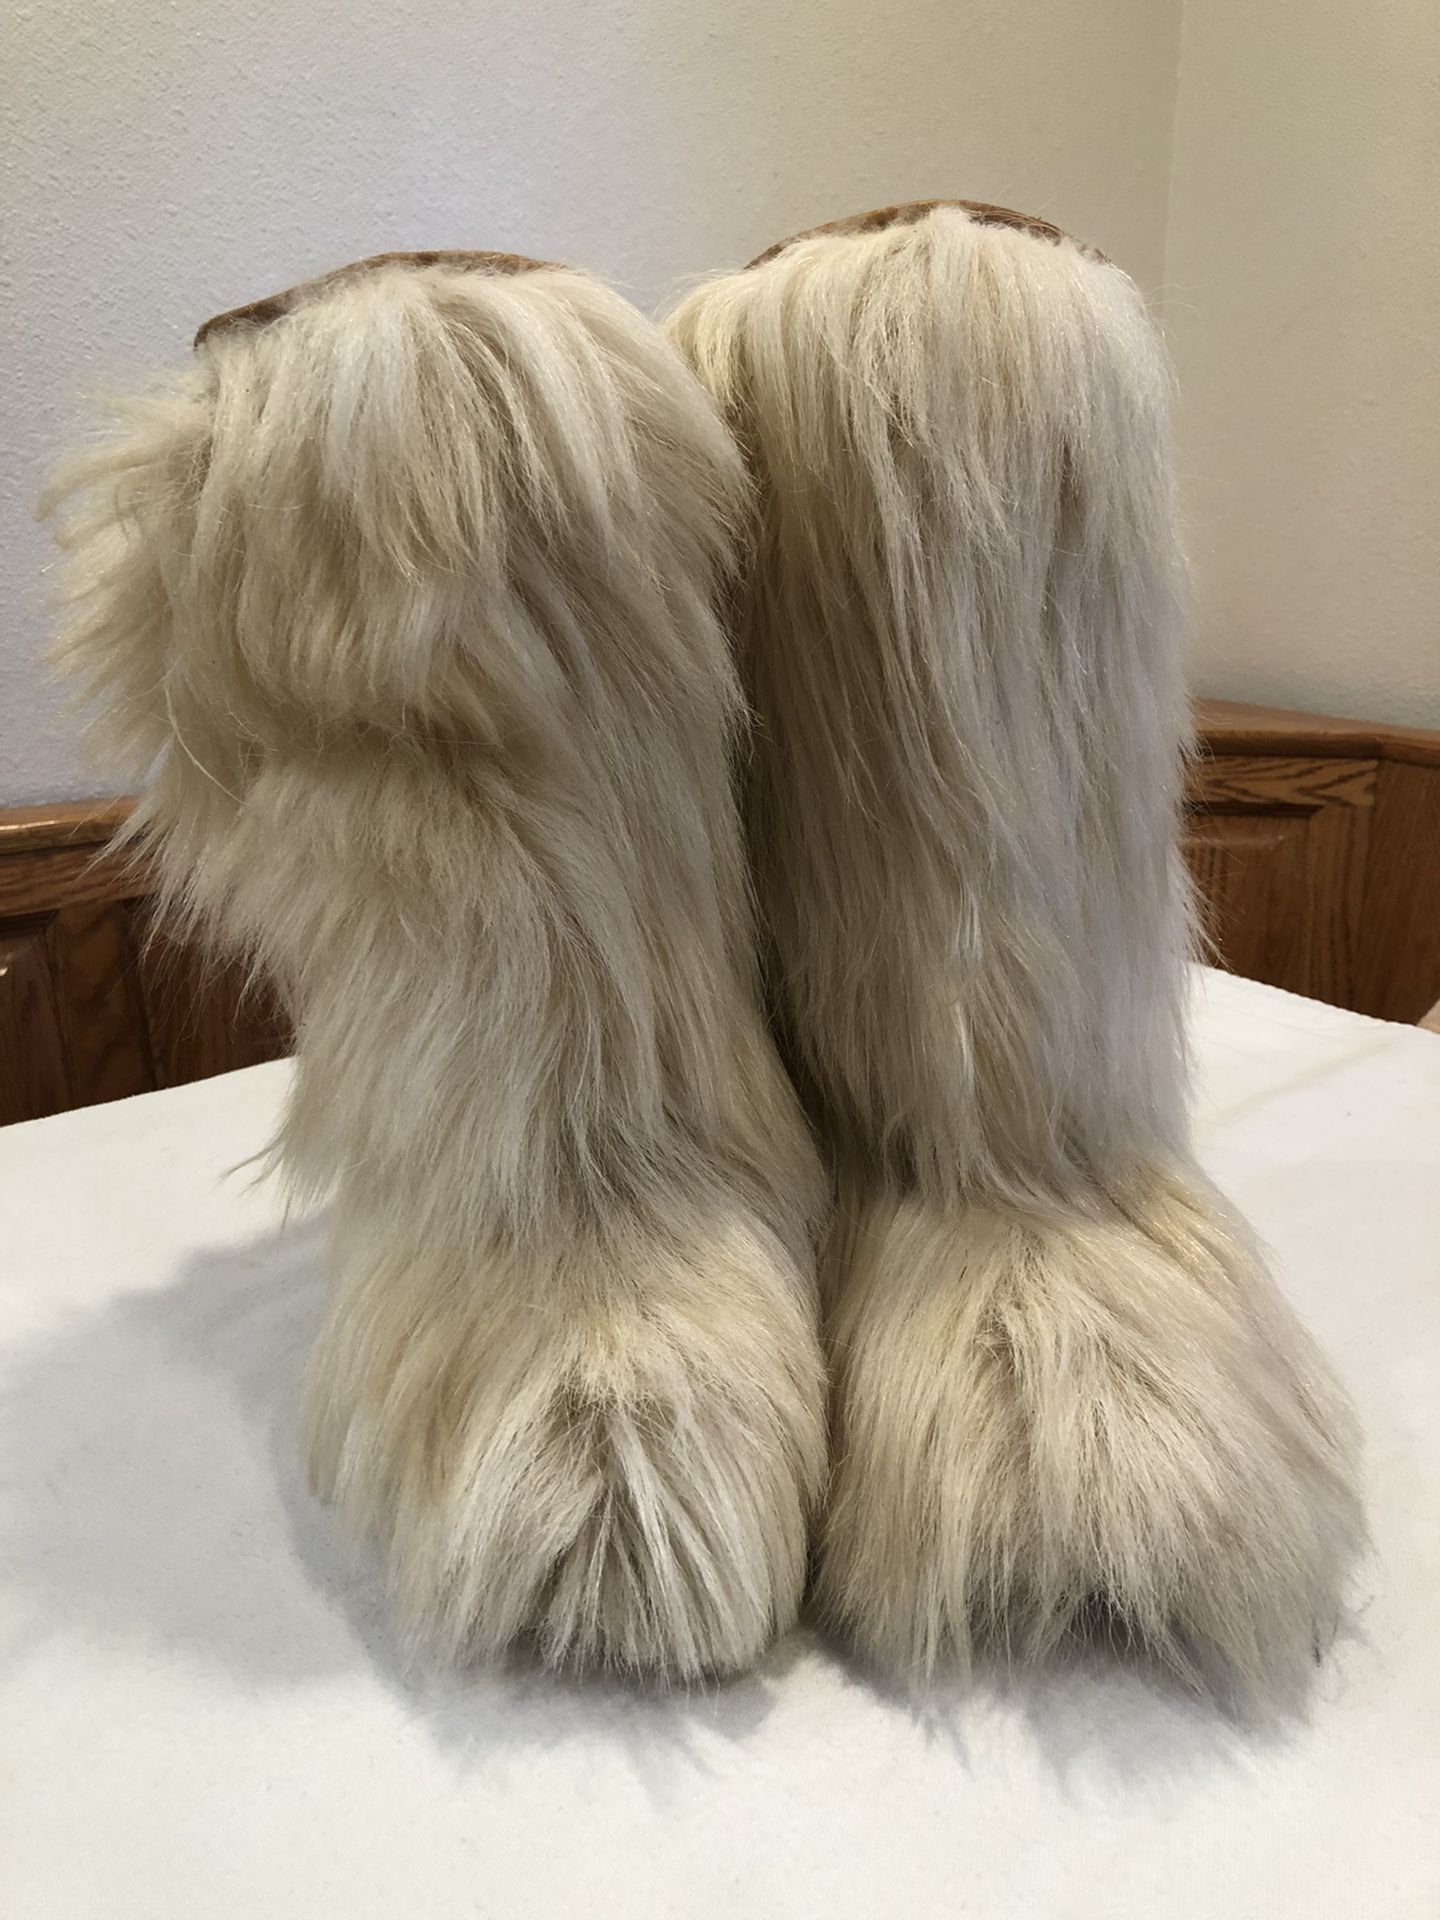 Vera Pelle Boots With The Fur Vintage 70’s Yeti Goat Hair/Fur Boots  Size 8 Us